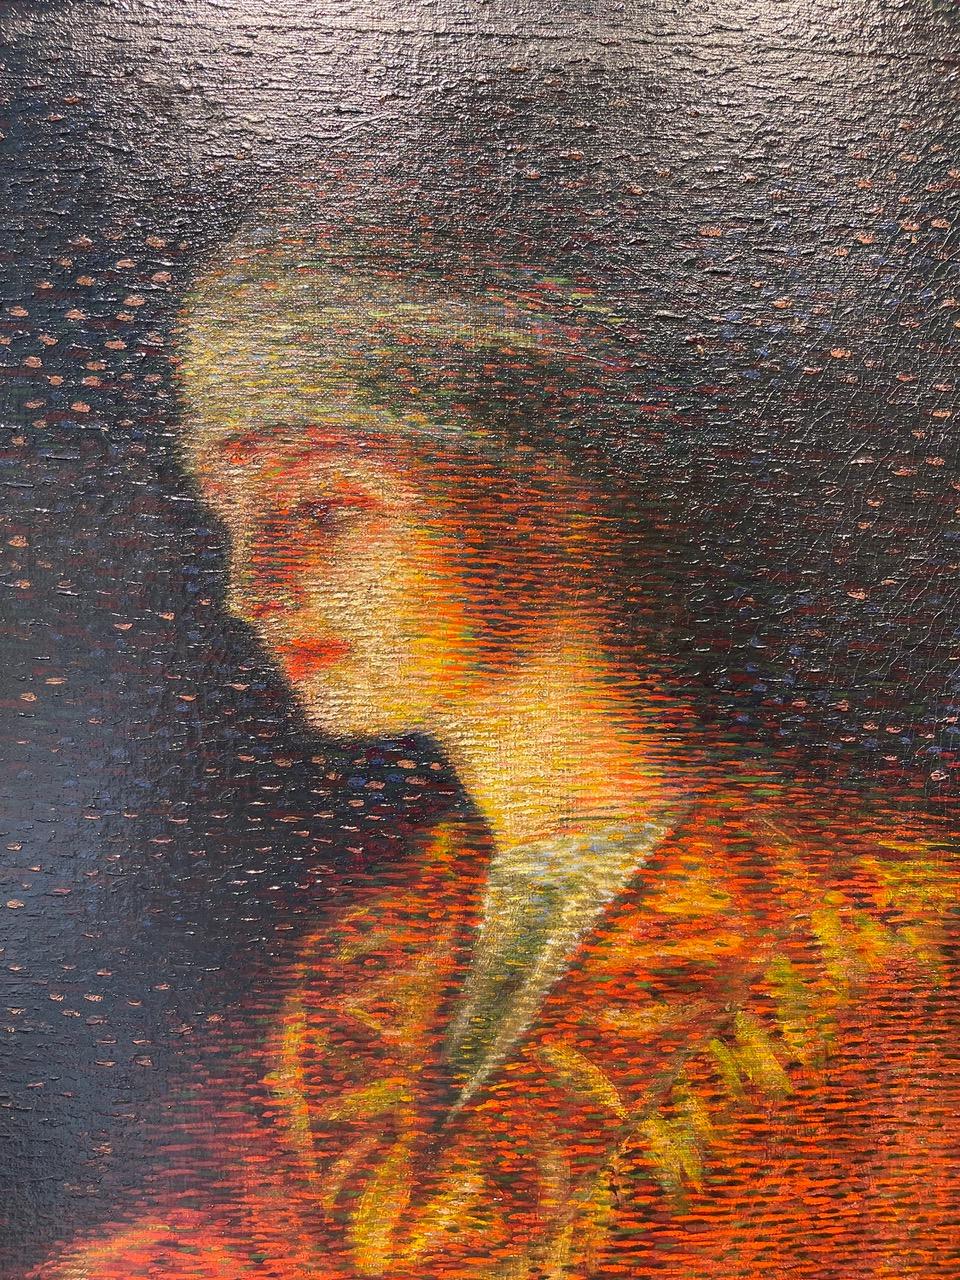 The seer - Painting by Amilcare Casati